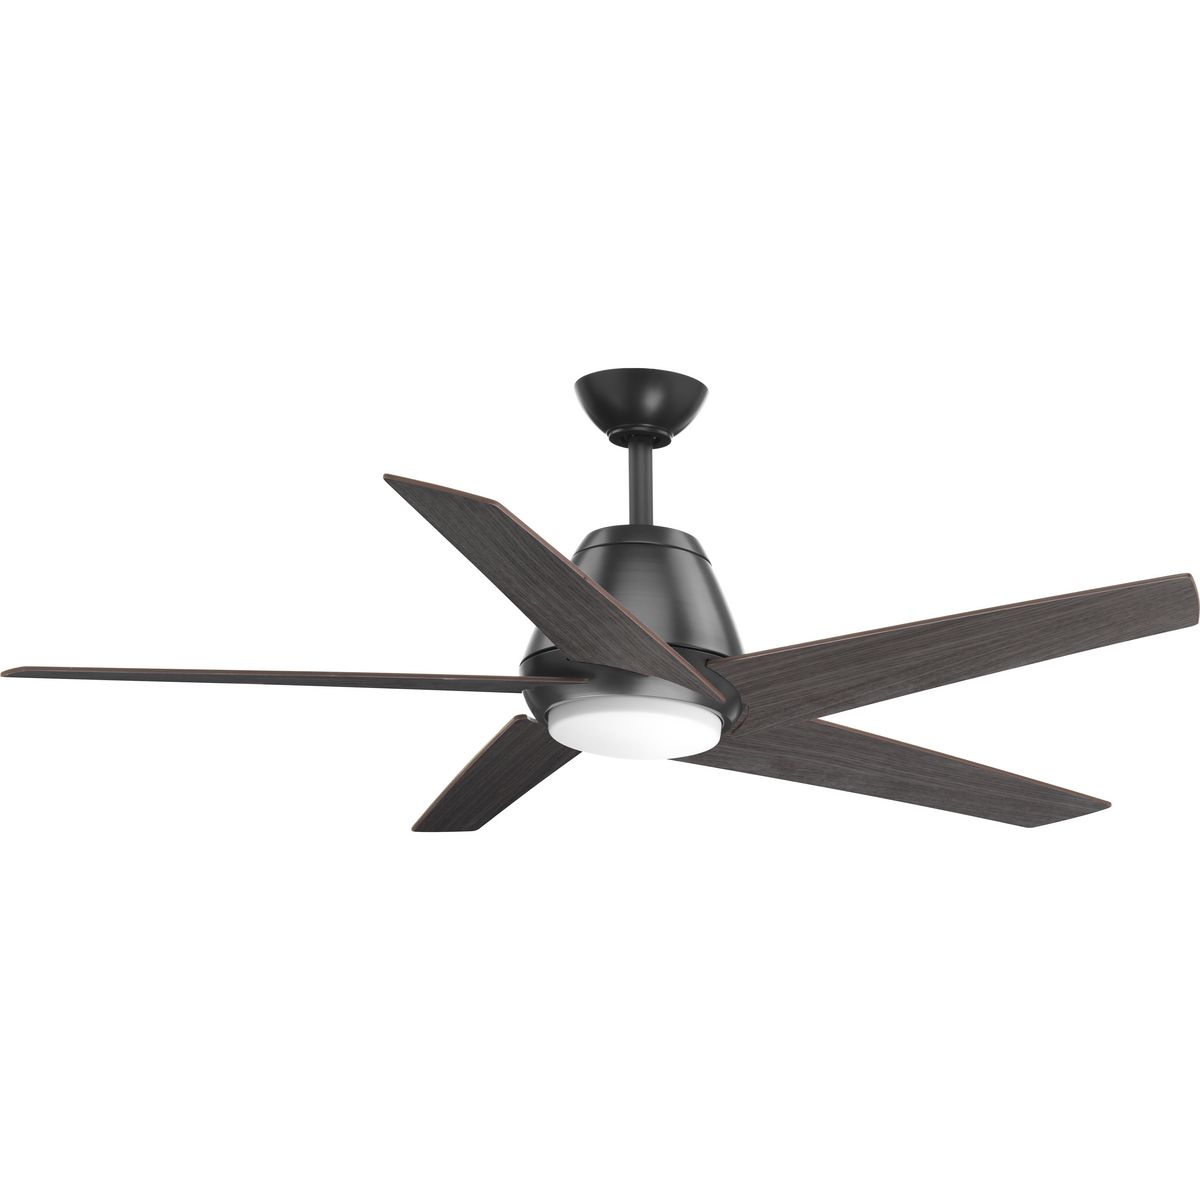 This five-blade 54 inch Gust ceiling fan features a white opal shade and graphite blades. A remote with batteries is included. Gust has a dual mount system to offer greater flexibility when installing. The 17W dimmable, 3000K LED module provides energy- and cost-savings benefits to the homeowner.